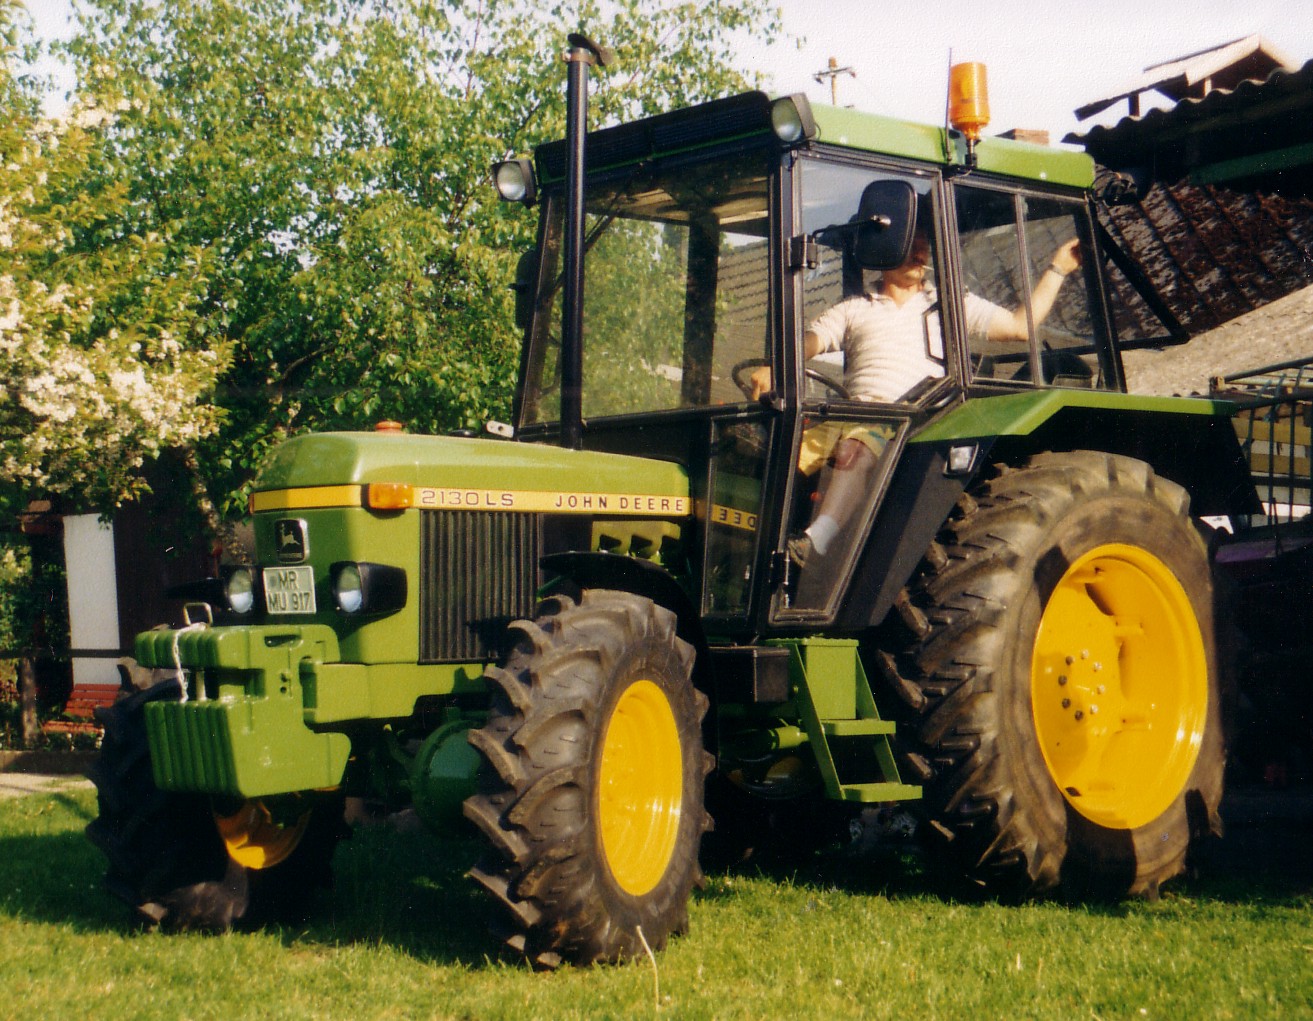 Tractor news and pictures: John Deere 2130 Pictures